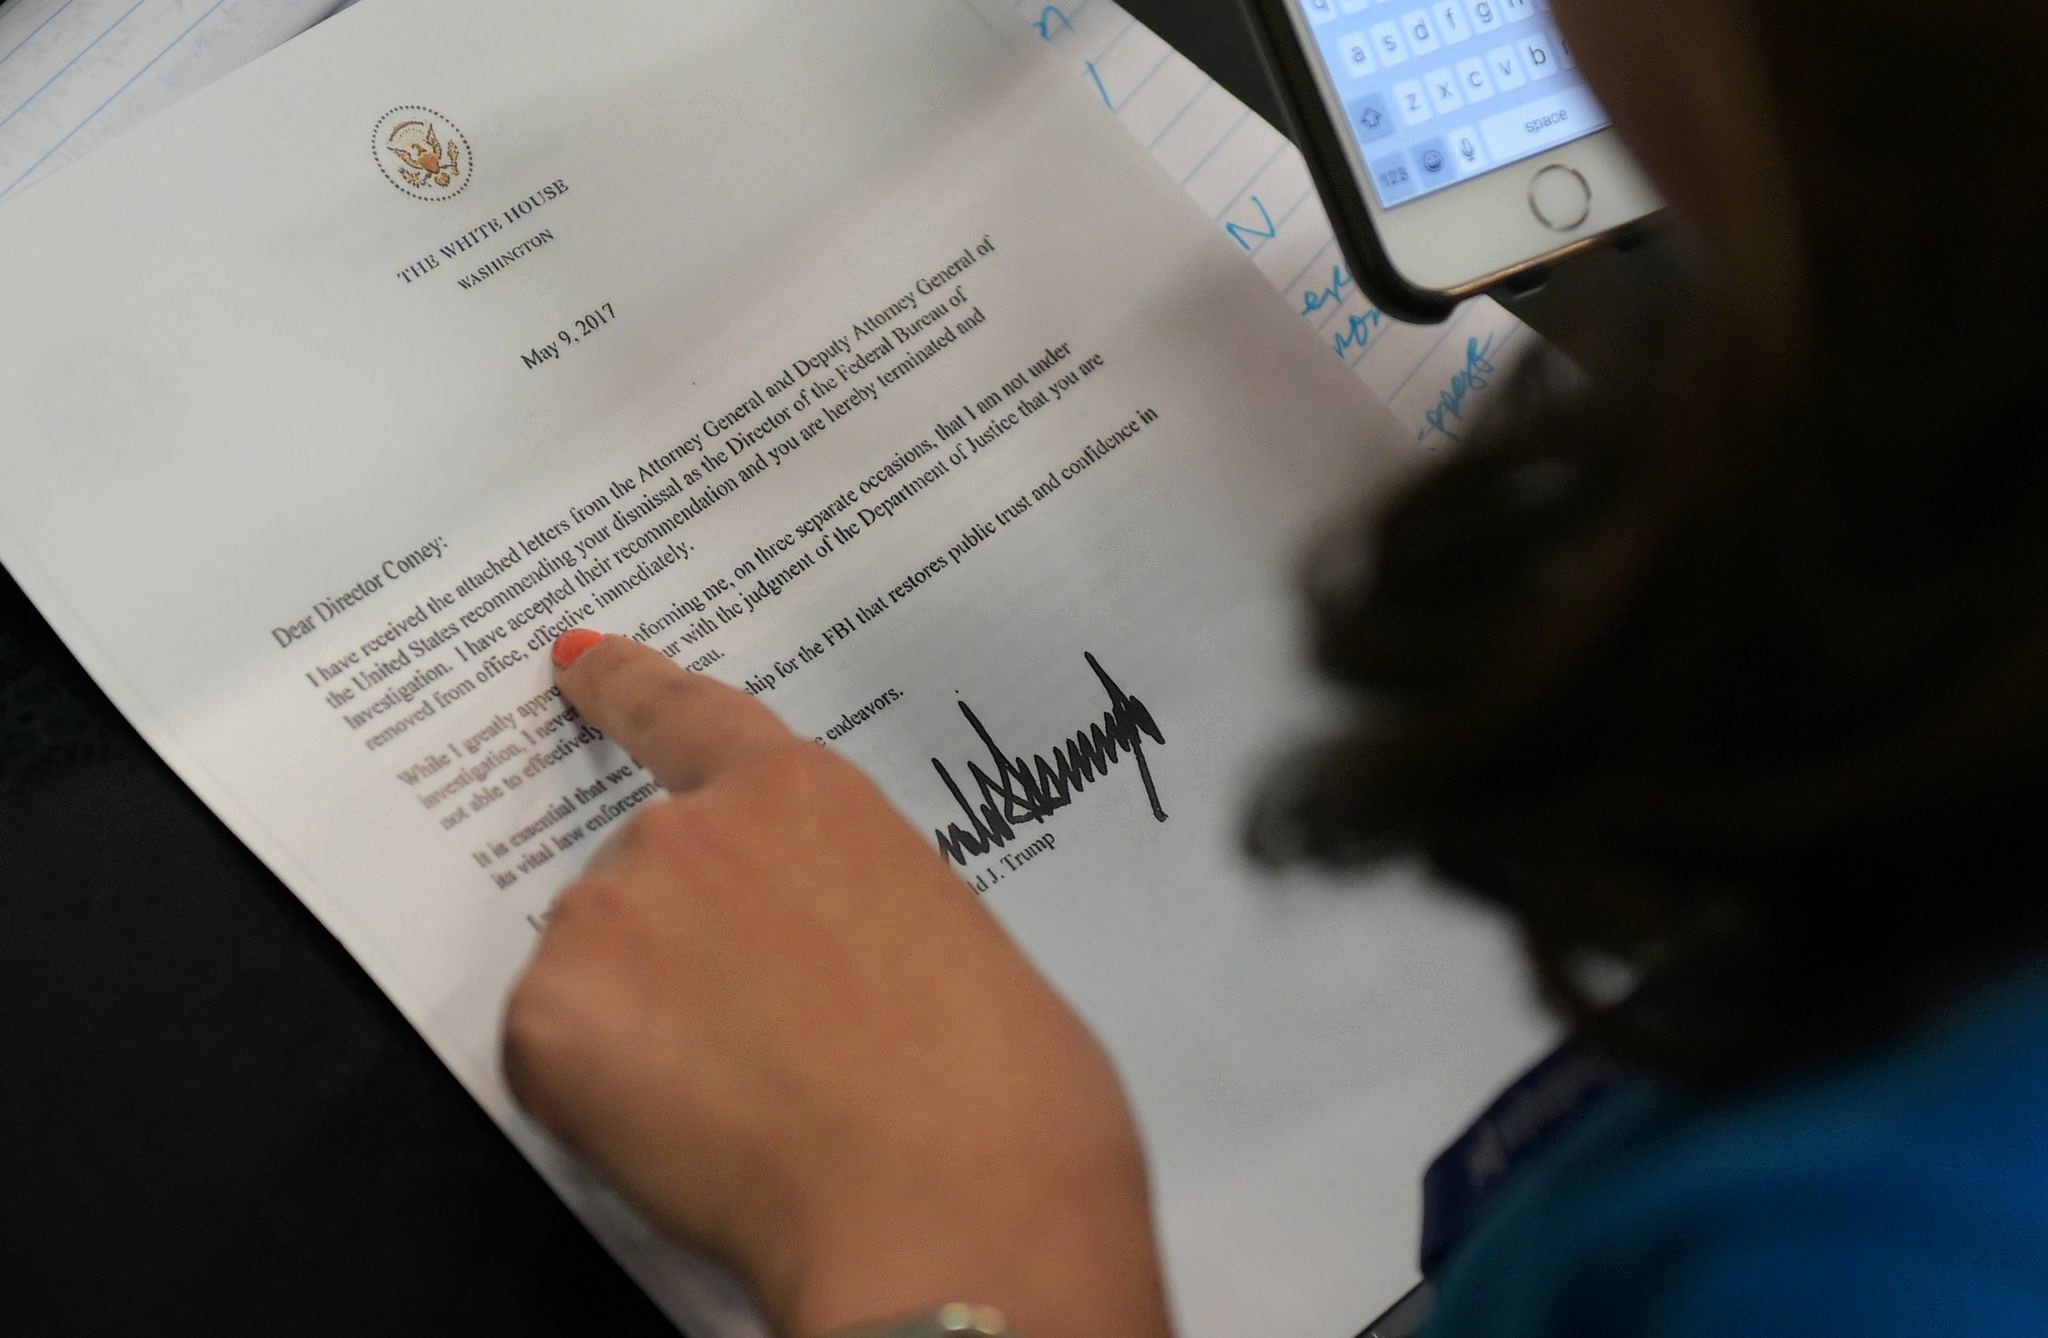 Office Of the President Letterhead Fresh Everything President Trump Has Tweeted and What It Was